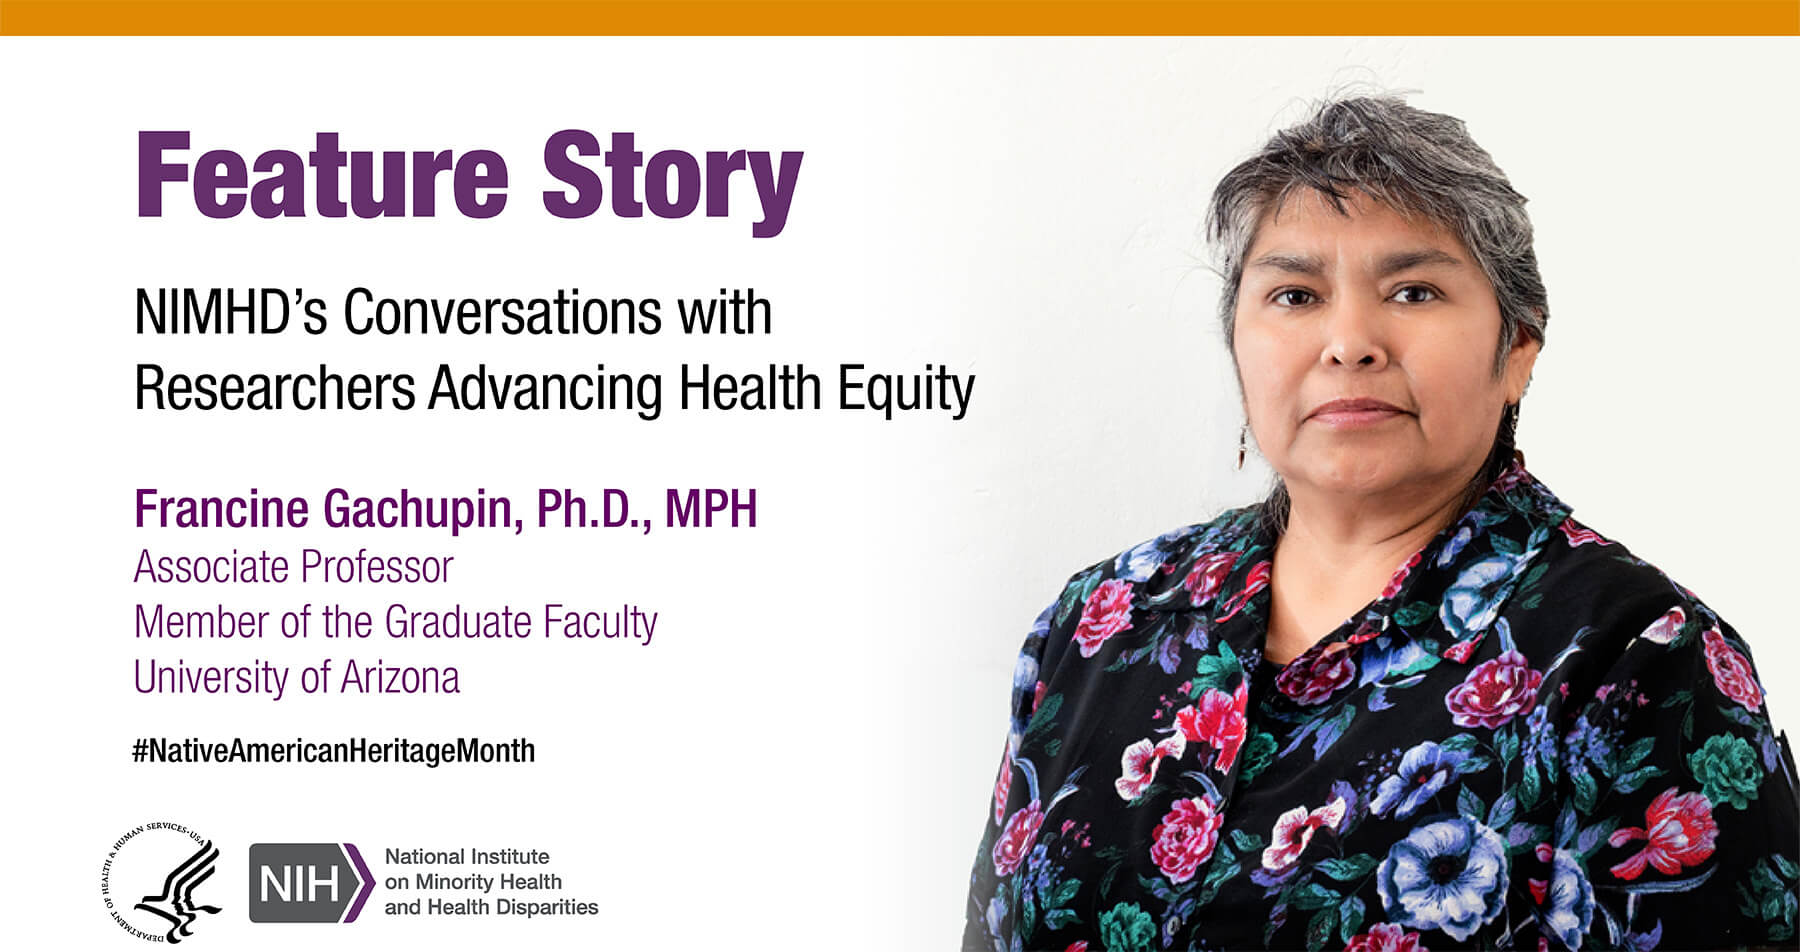 NIMHD's Conversations with Researchers Advancing Health Equity for Native American Heritage Month: Dr. Francine Gachupin, University of Arizona